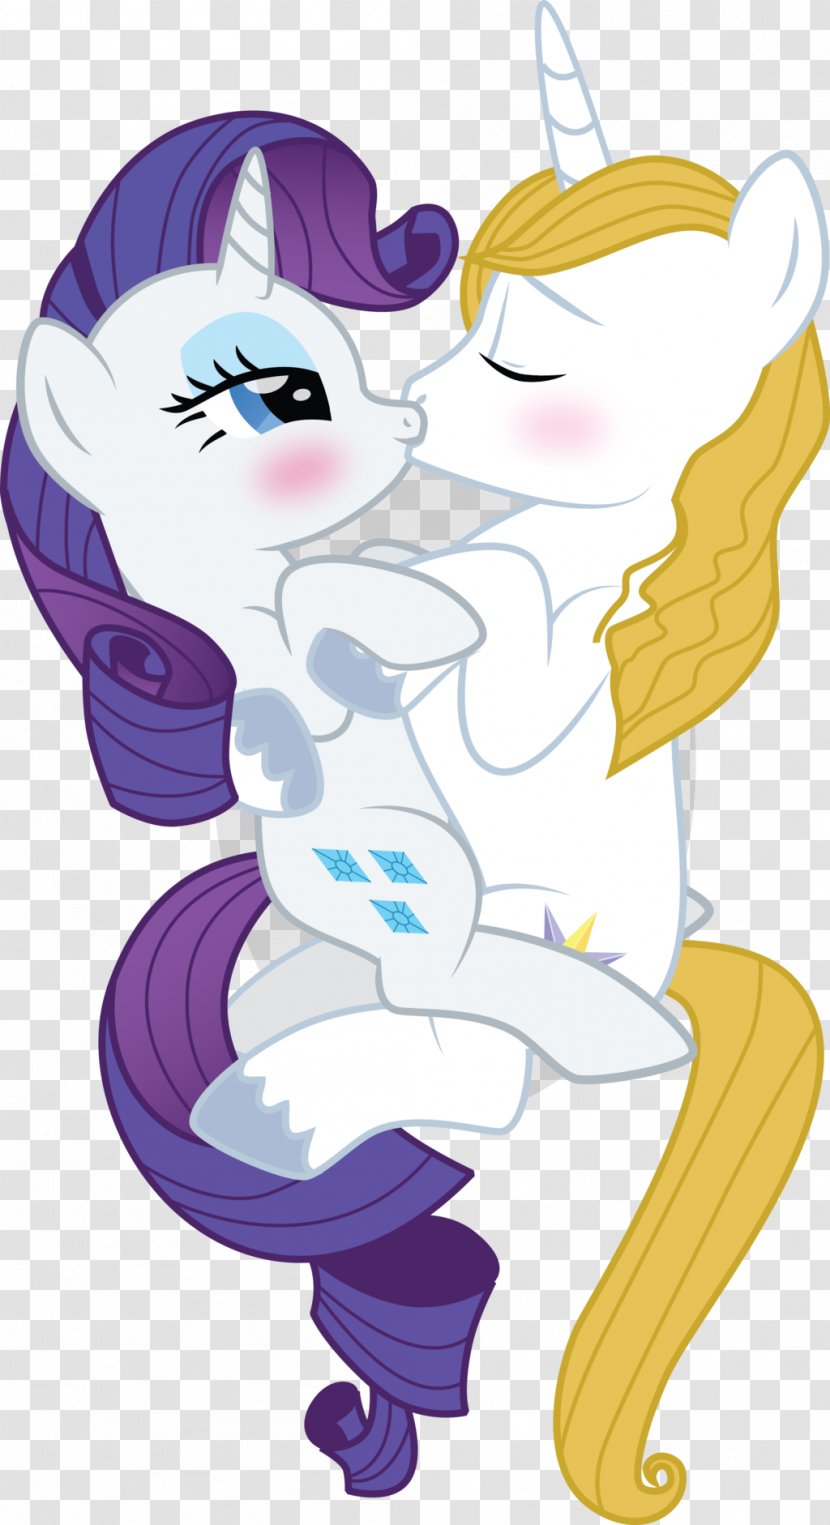 Rarity Sweetie Belle Pony Prince Blueblood - Tree - The Little Transparent PNG